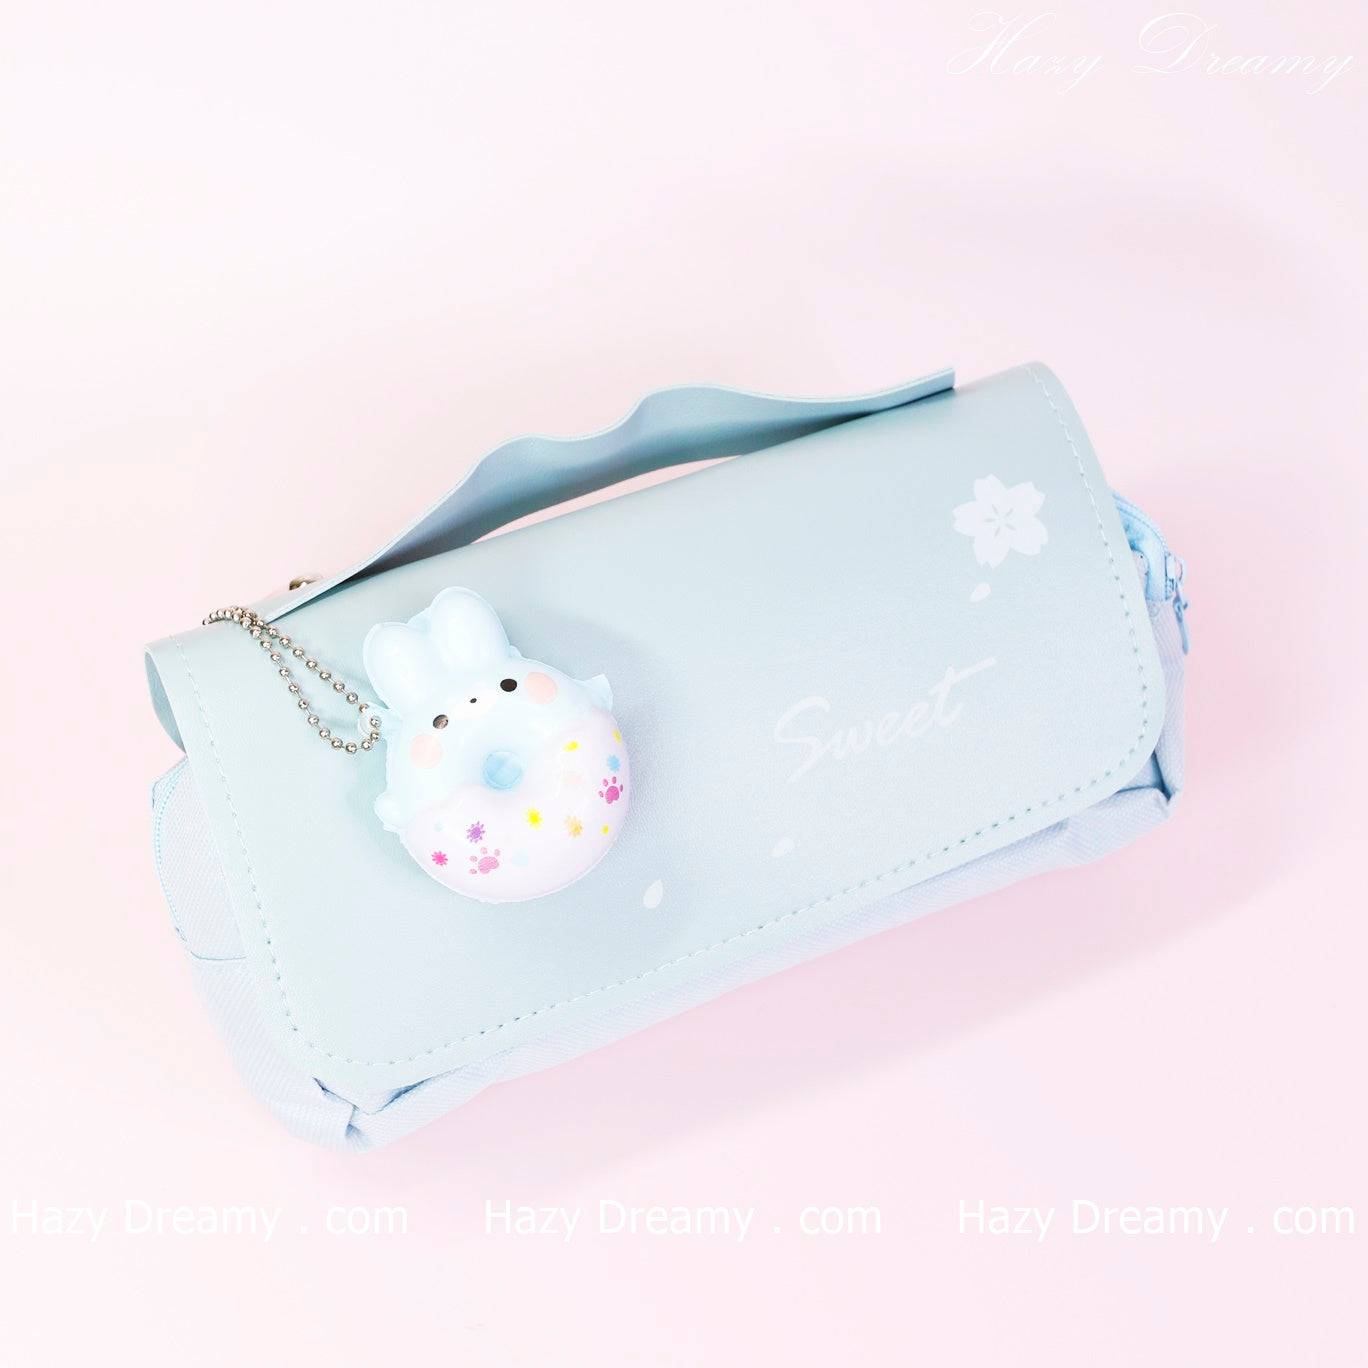 The image shows a light purple pencil case with a small, cute keychain attached to it. The keychain features a small, round character that resembles a bunny with a floral design. The word "Sweet" is written on the pencil case, which also has decorative elements like small flowers. The background of the image is also light purple, creating a soft and dreamy aesthetic. The brand name "Hazy Dreamy" is faintly visible in the top right corner